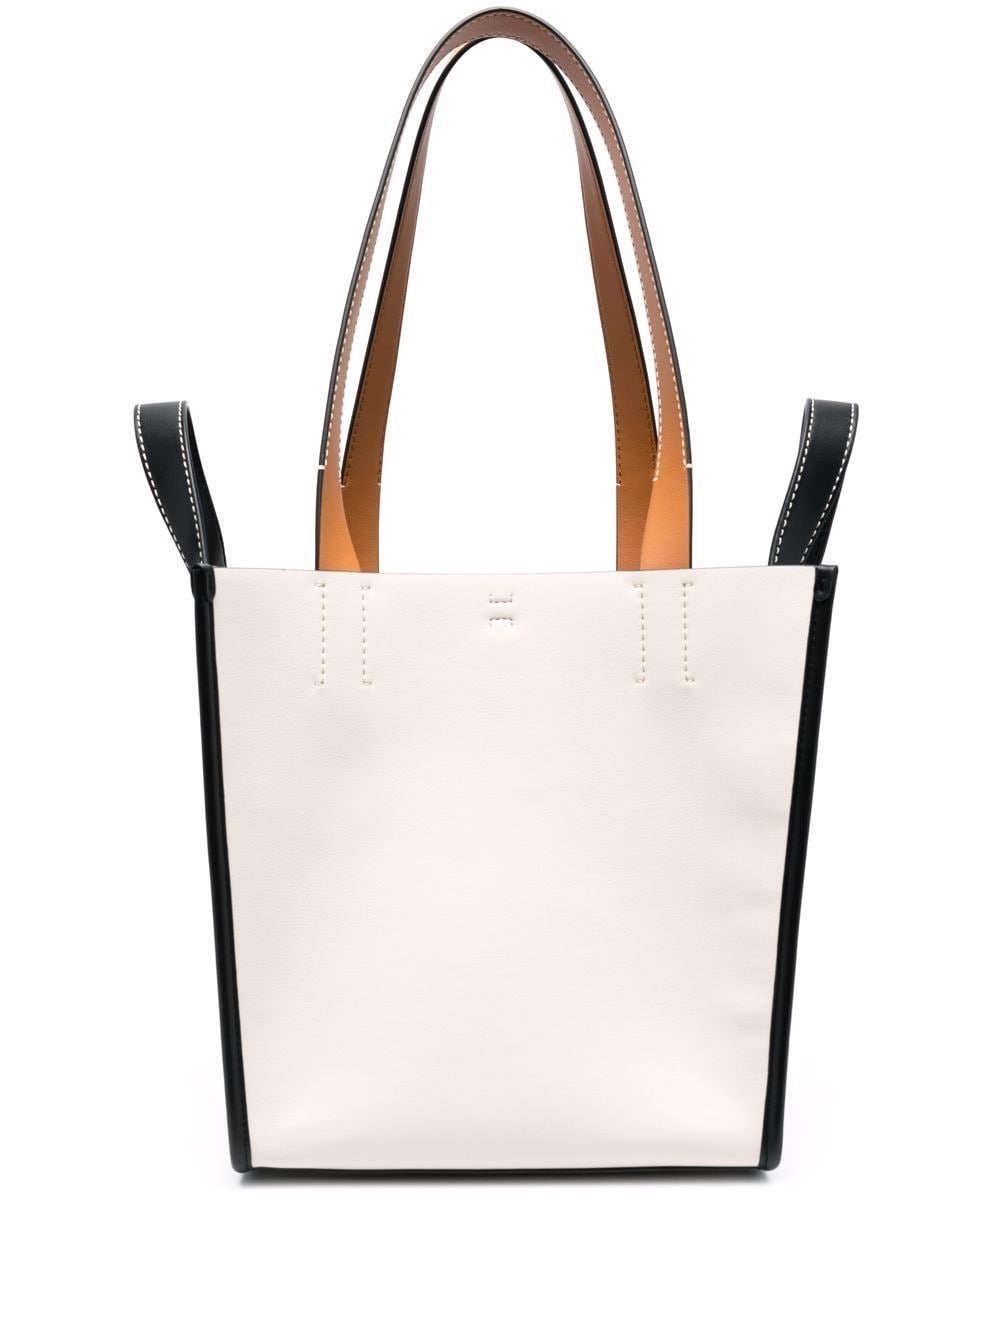 Proenza Schouler White Label Large Mercer Leather Tote Bag - Farfetch